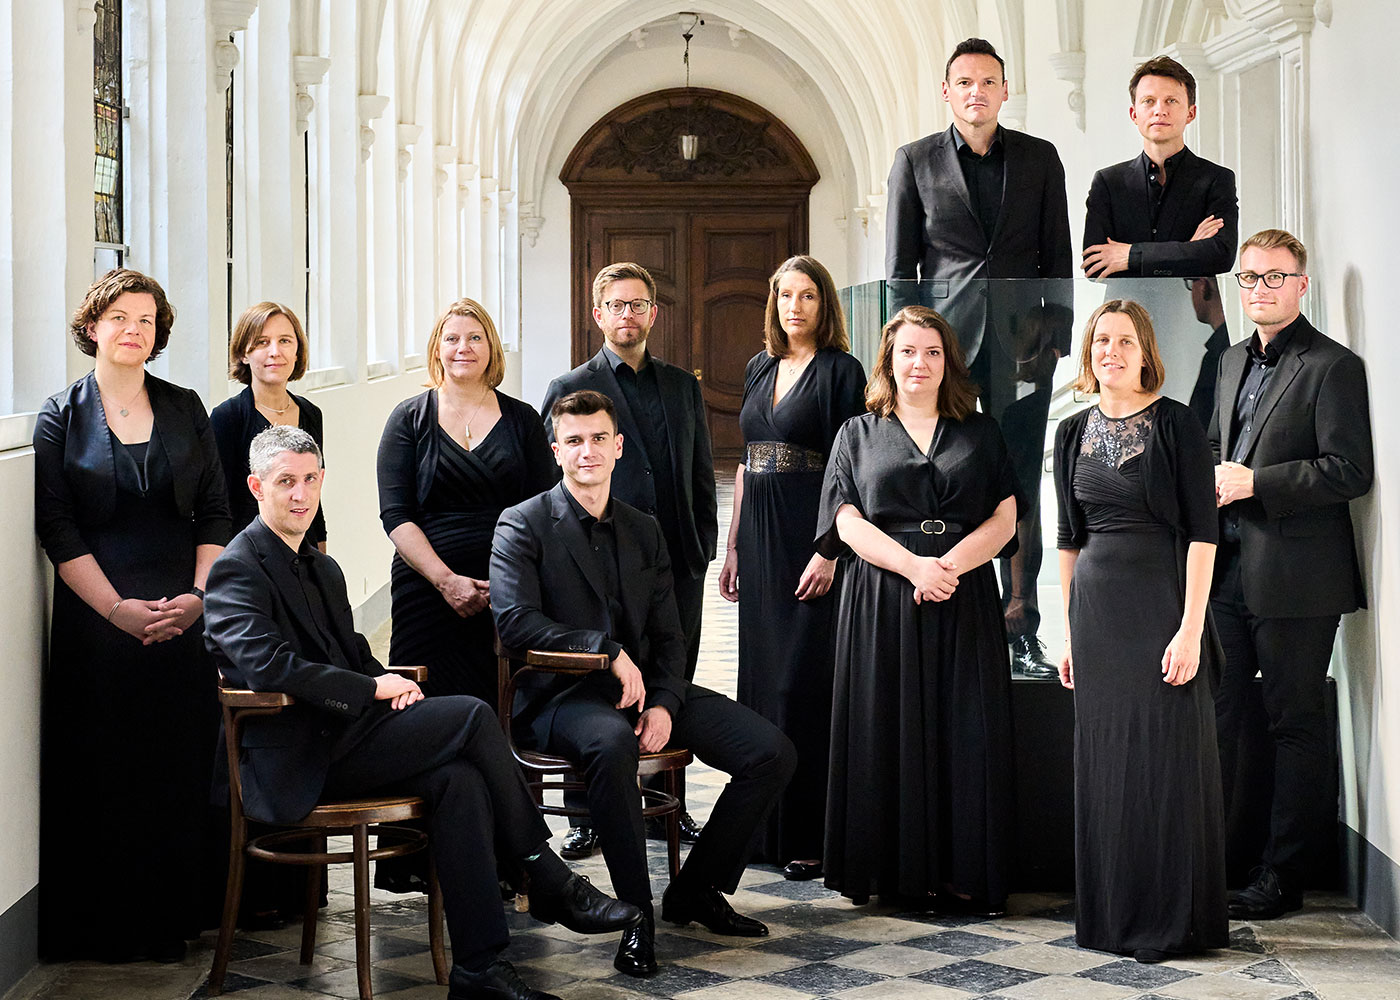 Stile Antico – England’s Nightingale: The Remarkable Music of William Byrd